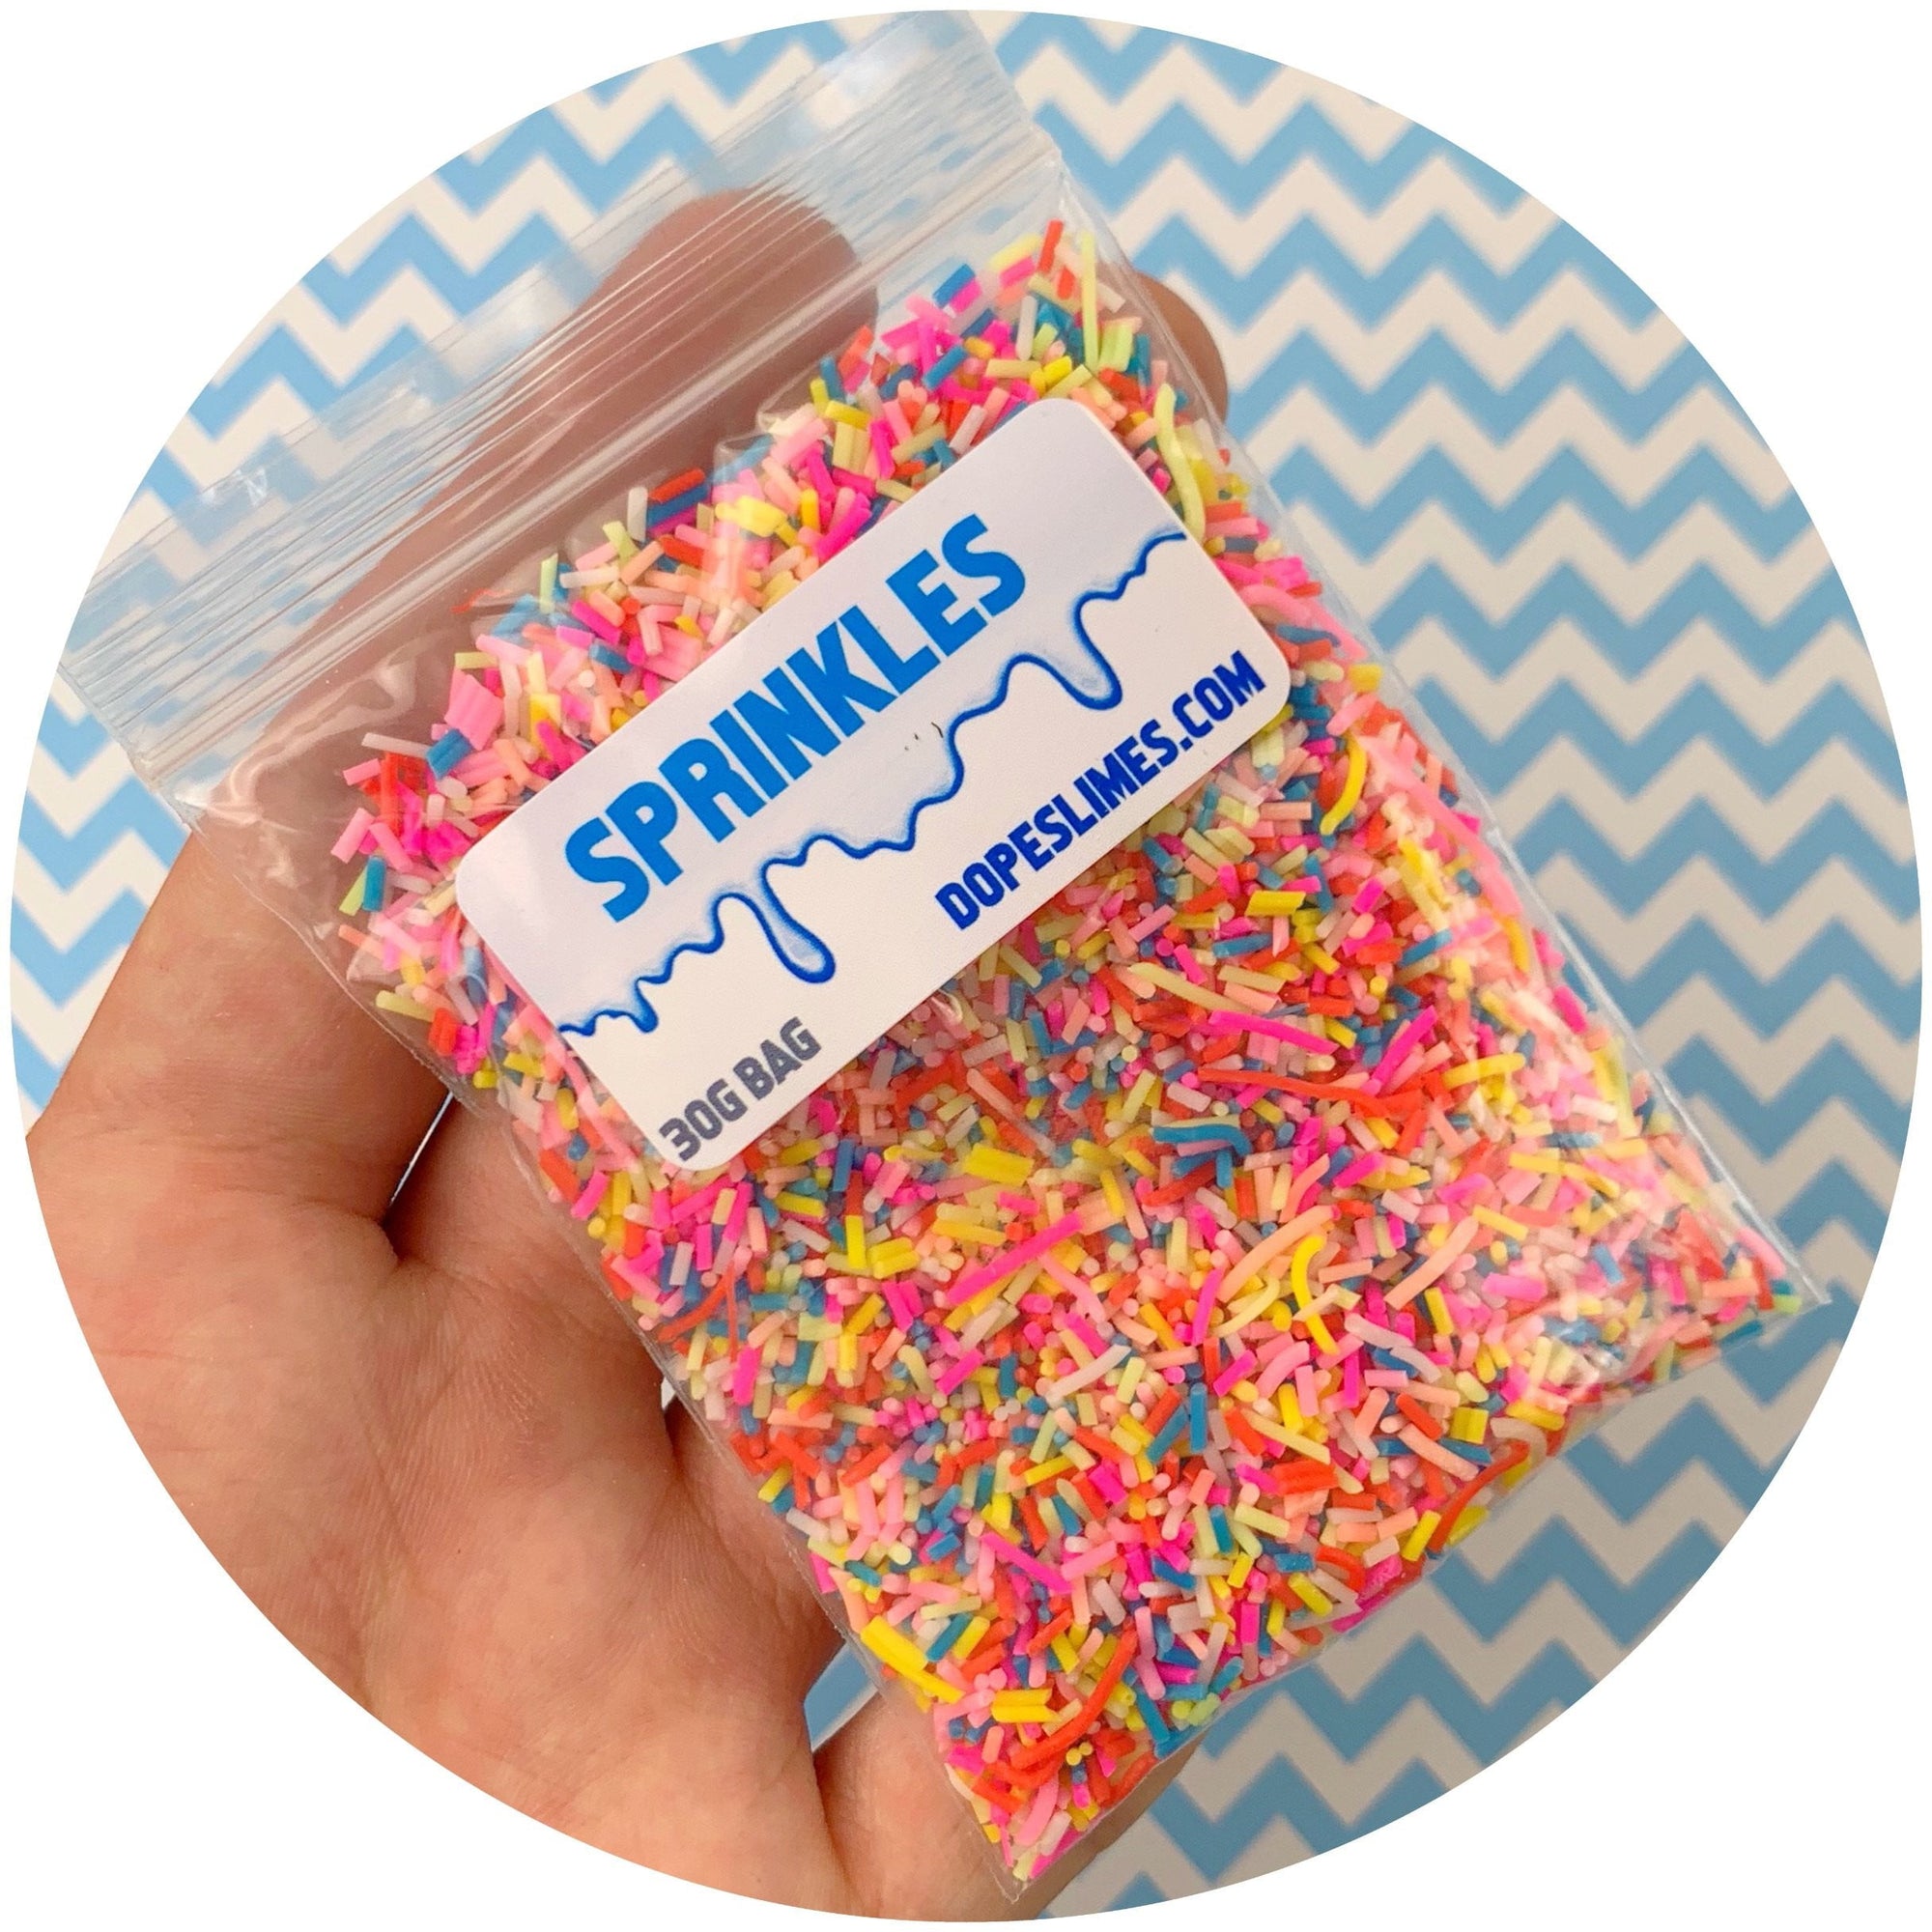 Colorful Foam Sprinkles Toppings, Colorful Fake Sprinkles, Mini Rainbow  Foam Ball Beads for Slime, Faux Nonpareils, Miniature Bubblegum Candy